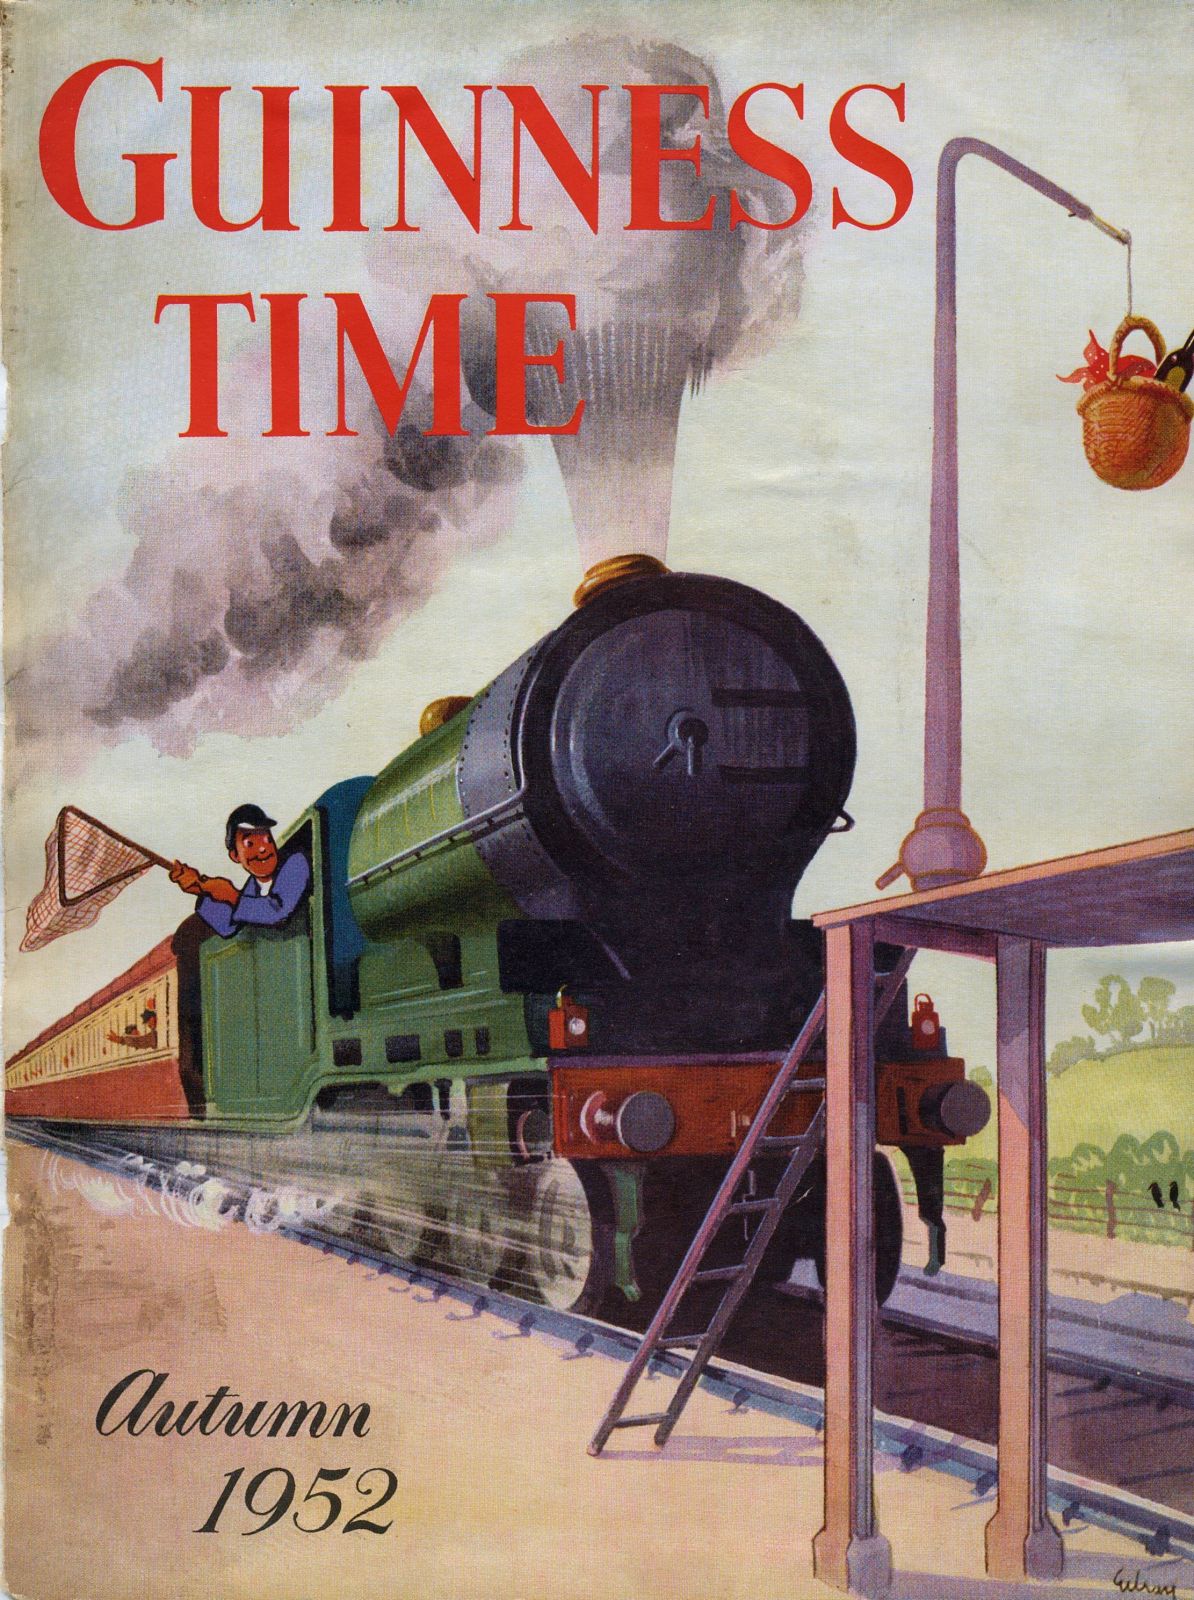 Guinness Time Autumn 1952